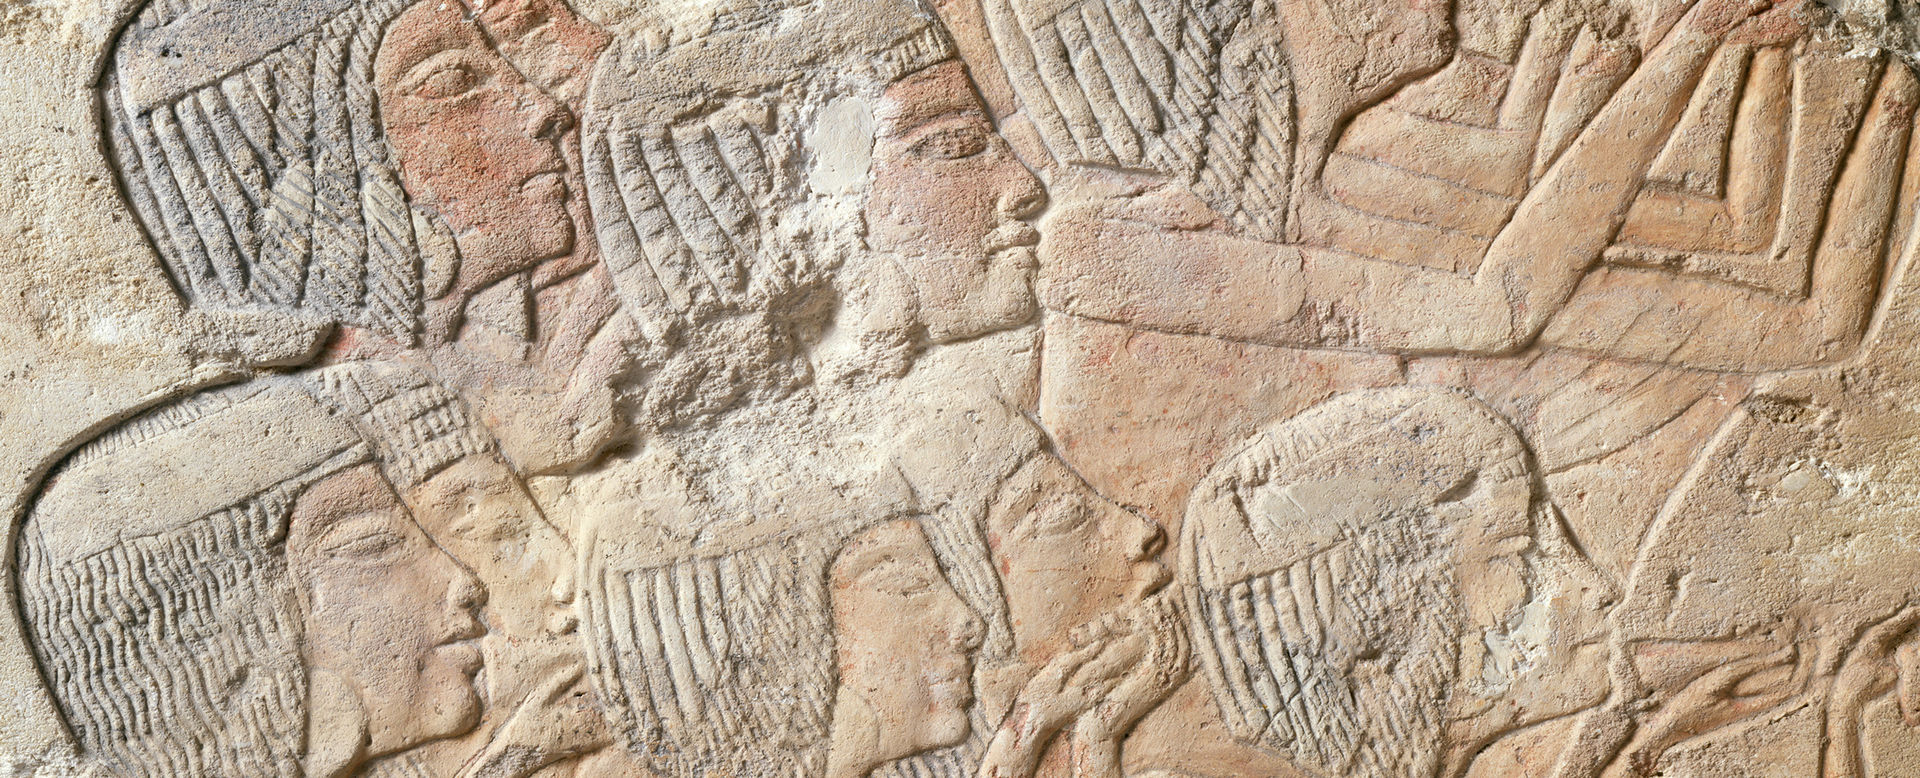 Detail of relief showing heads in profile view